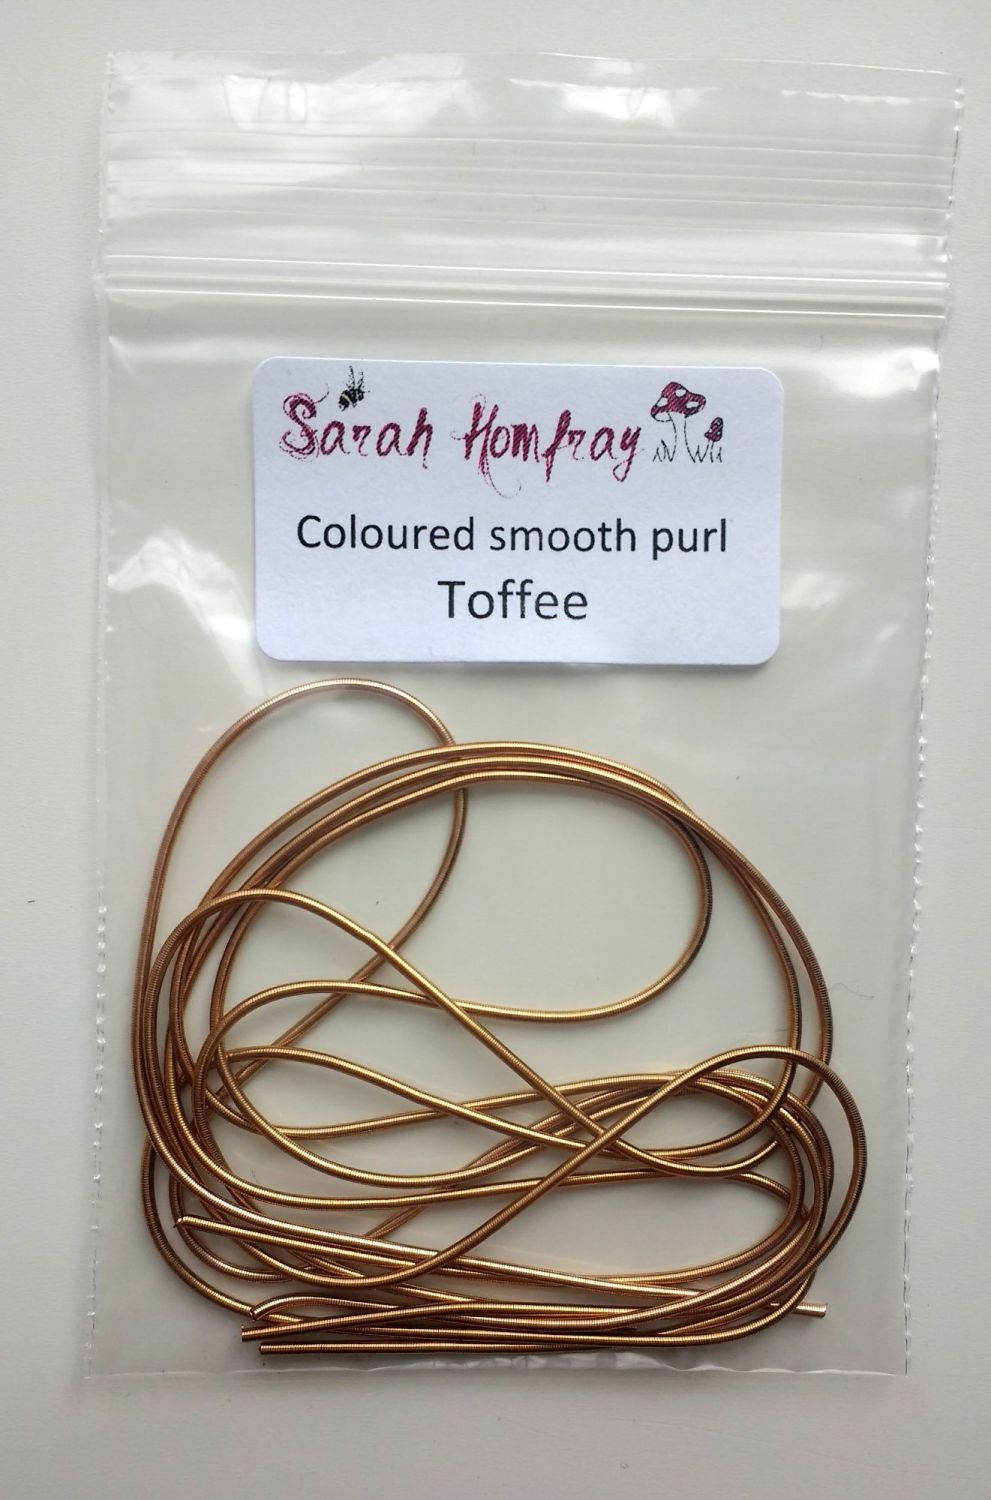 NEW! Coloured smooth purl no.6 - Toffee